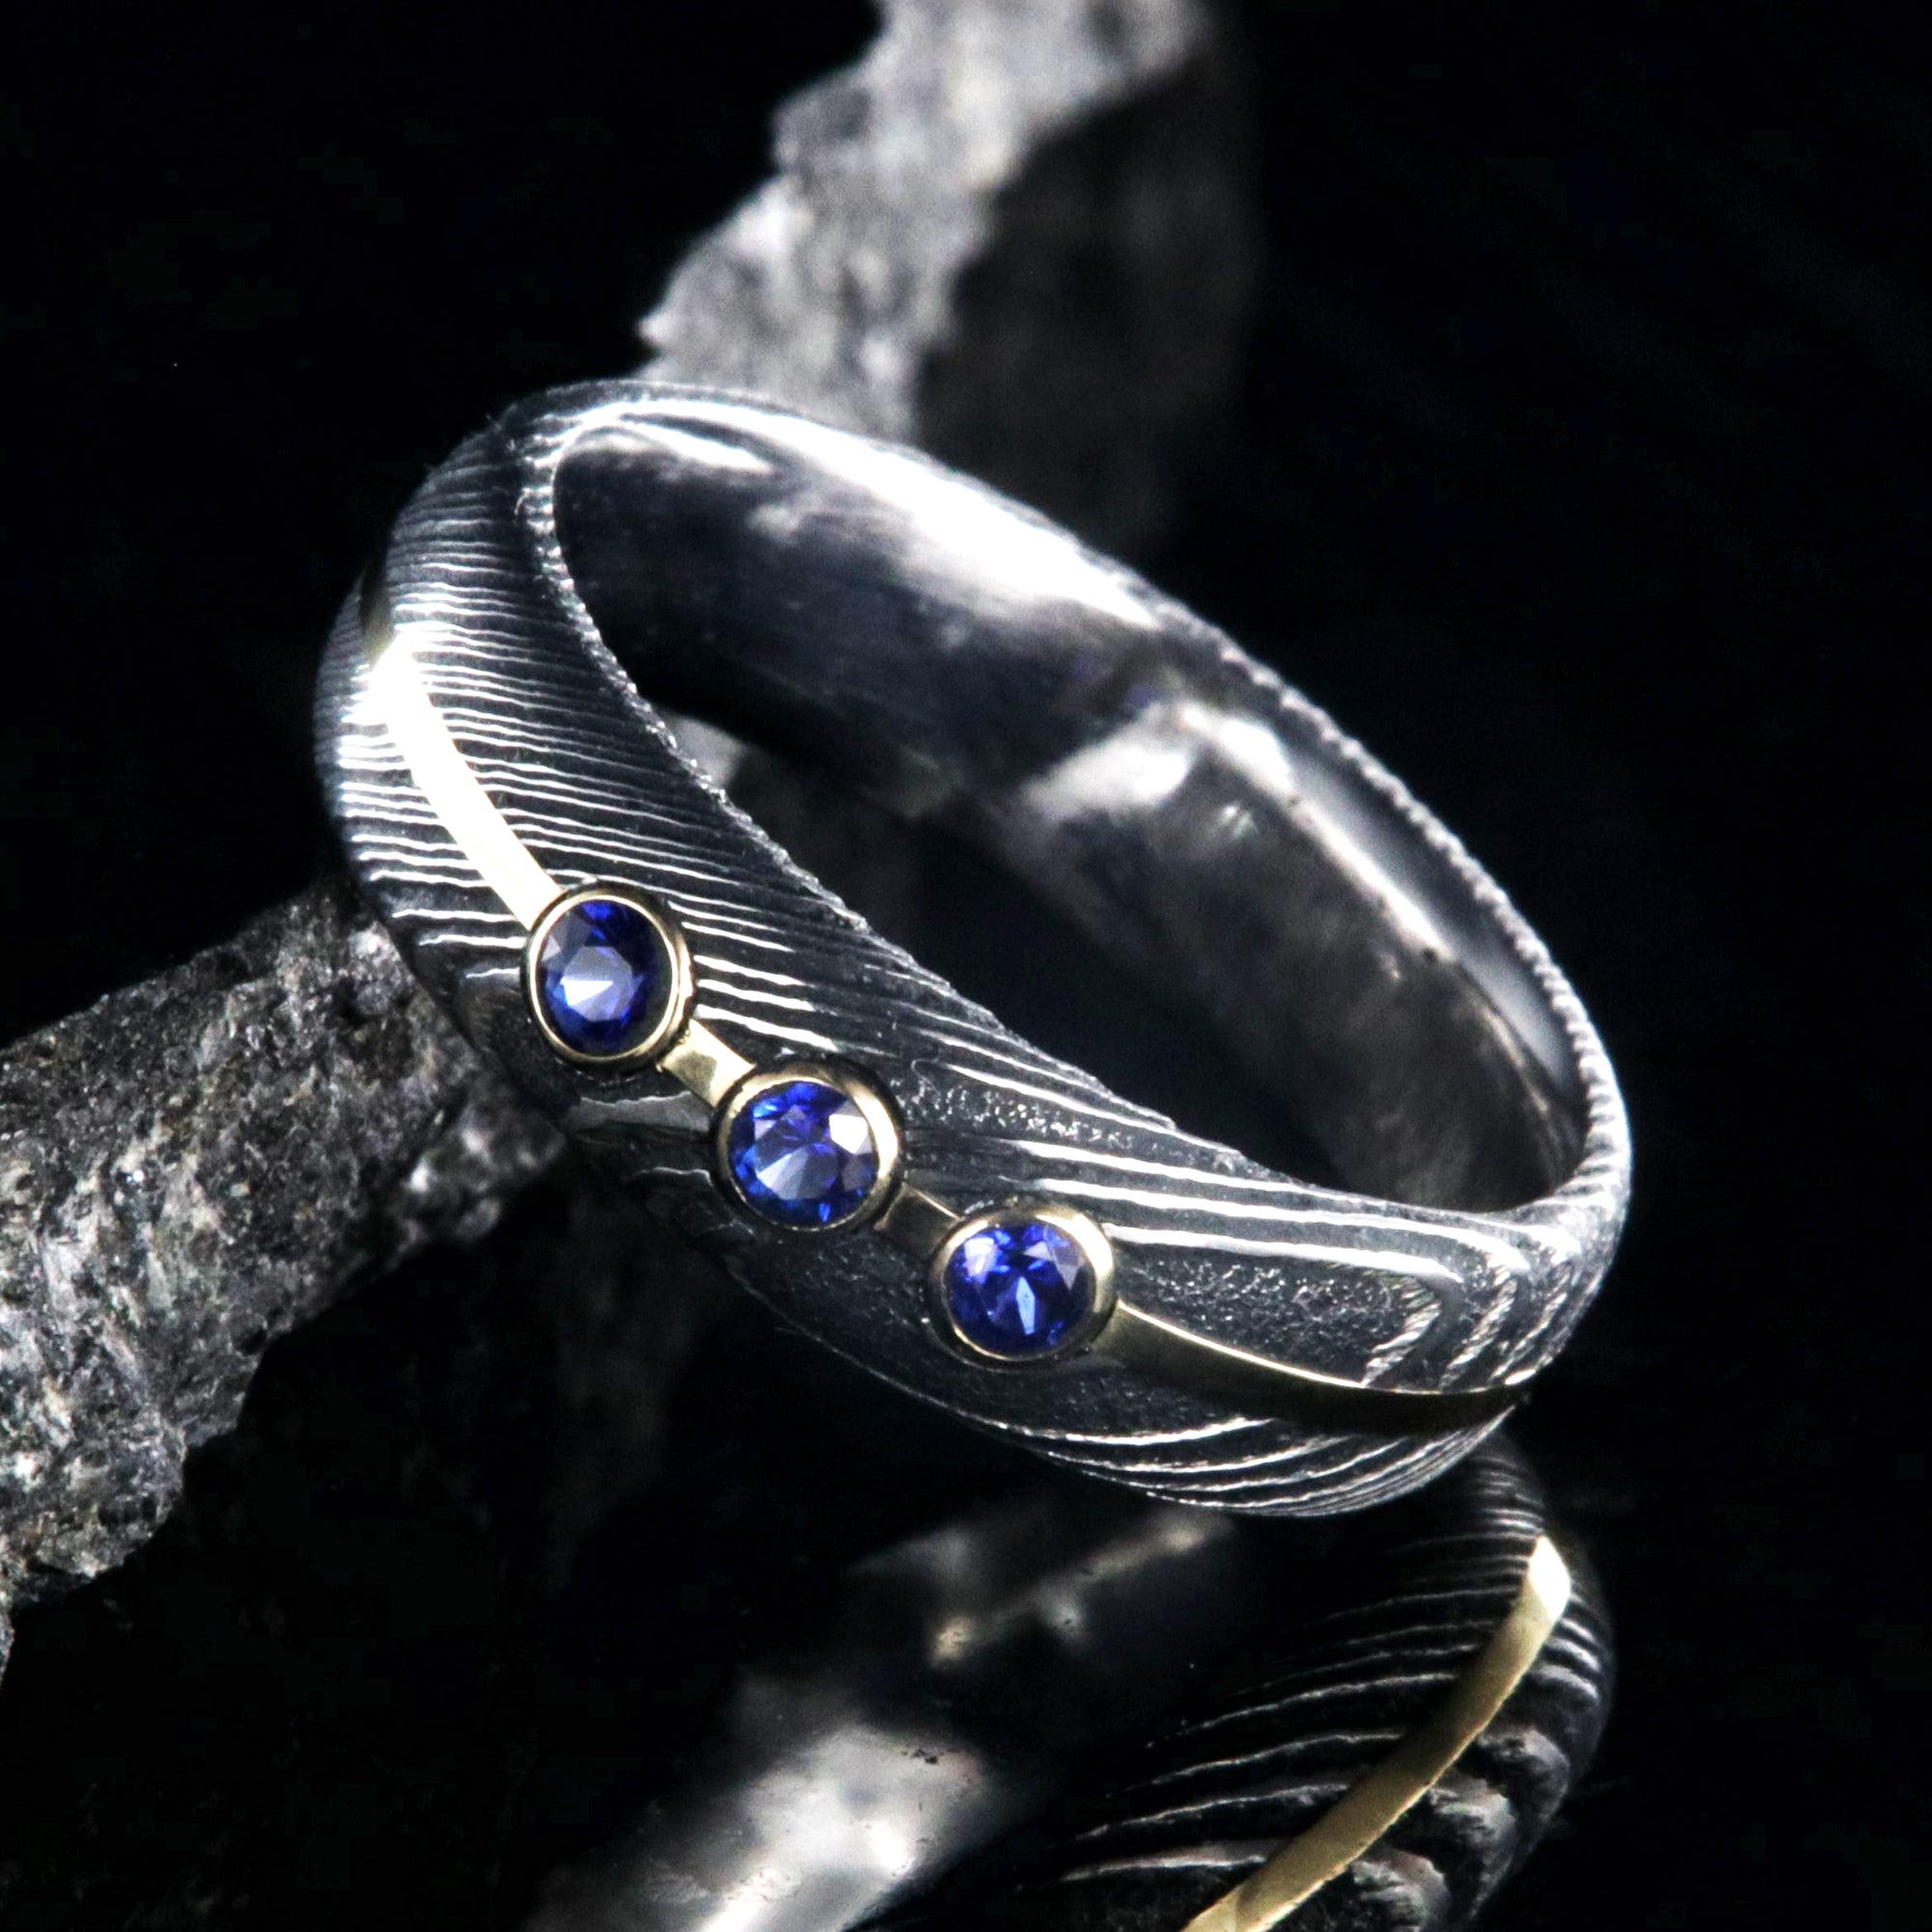 6mm wide black Damascus steel wedding band with 3 blue sapphire stone with a yellow gold center inlay